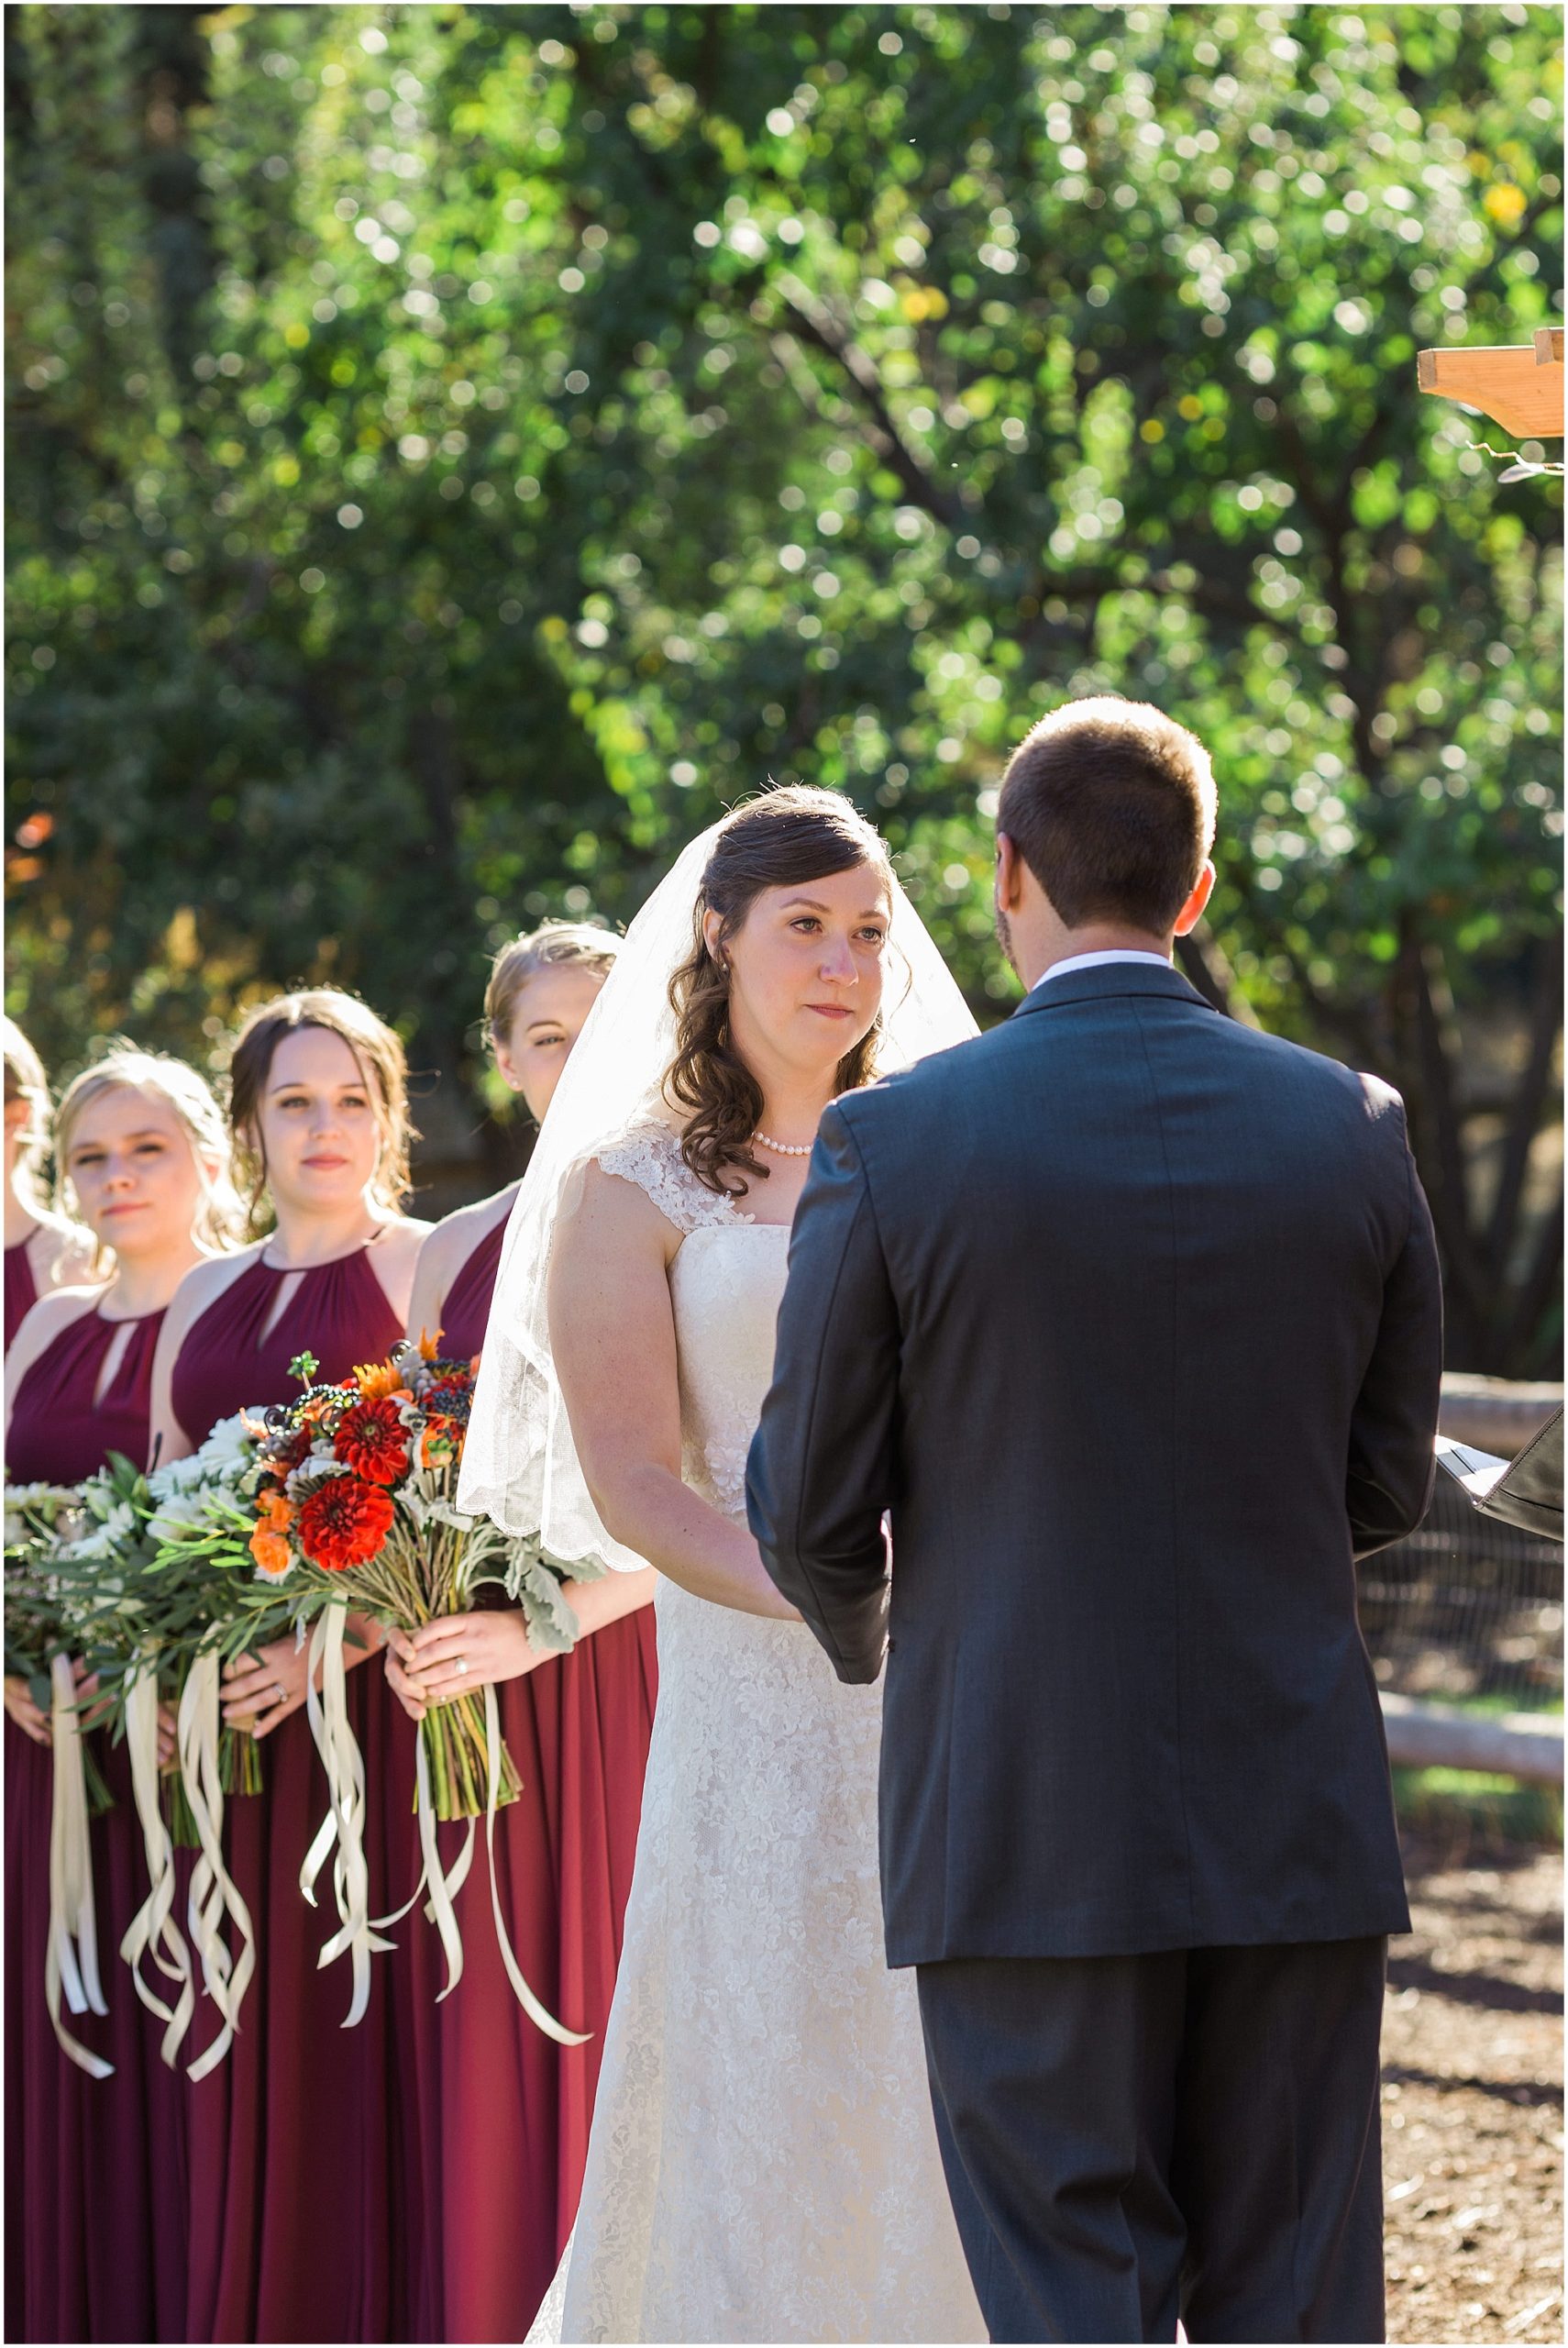 This bride looks longingly into her groom's eyes as she says her wedding vows during their gorgeous fall ceremony at Hollinshead Barn in Bend, OR. | Erica Swantek Photography